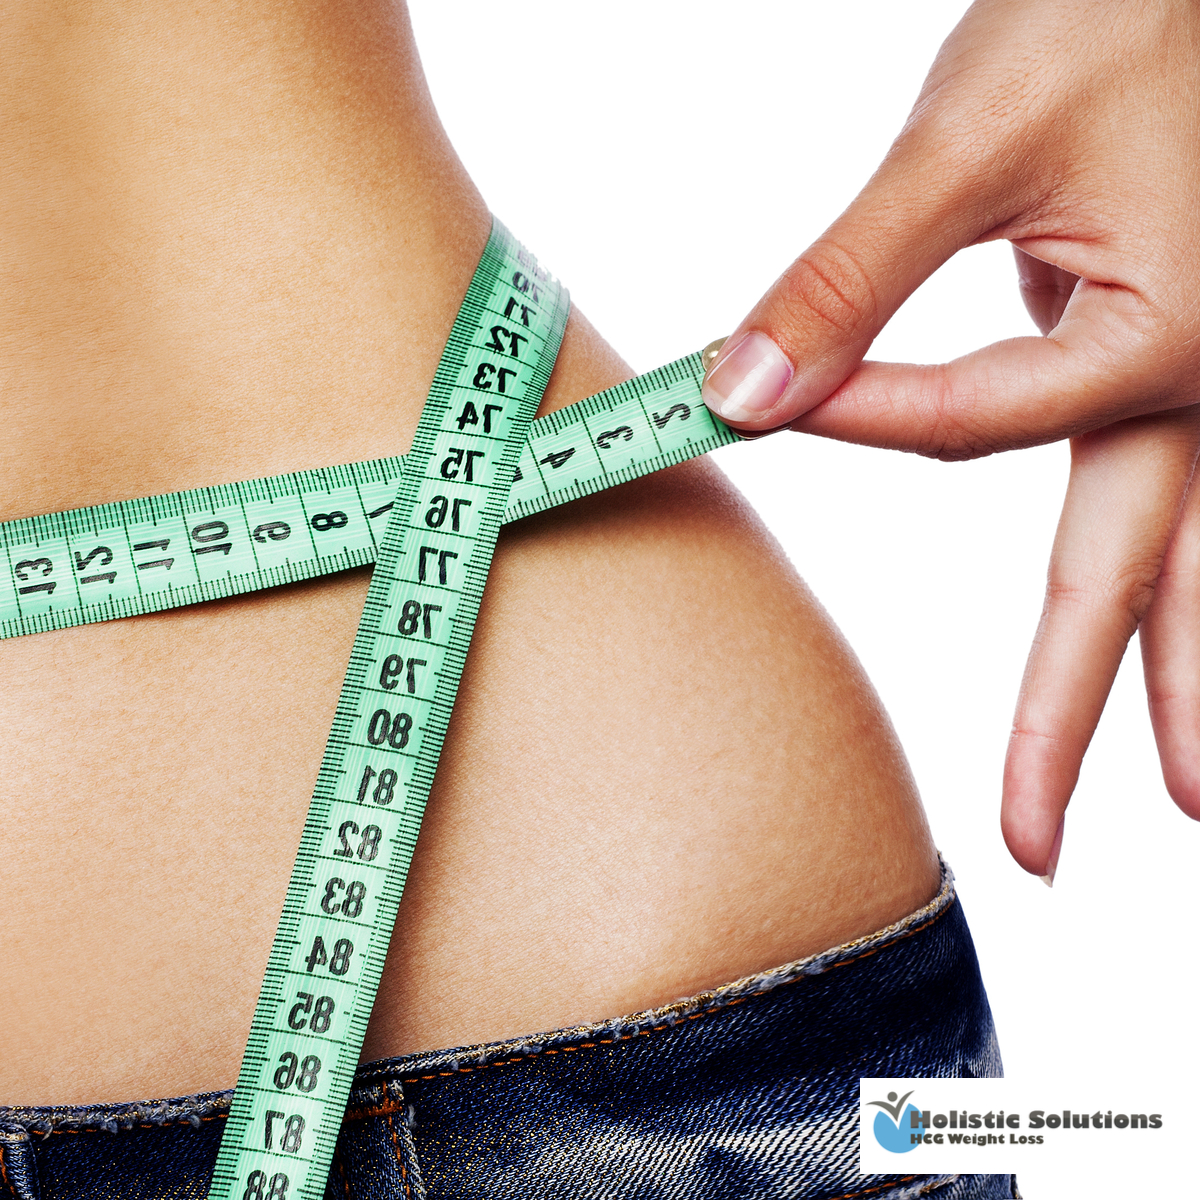 HCG Injections To Lose Weight Near Escondido - Does It Work?